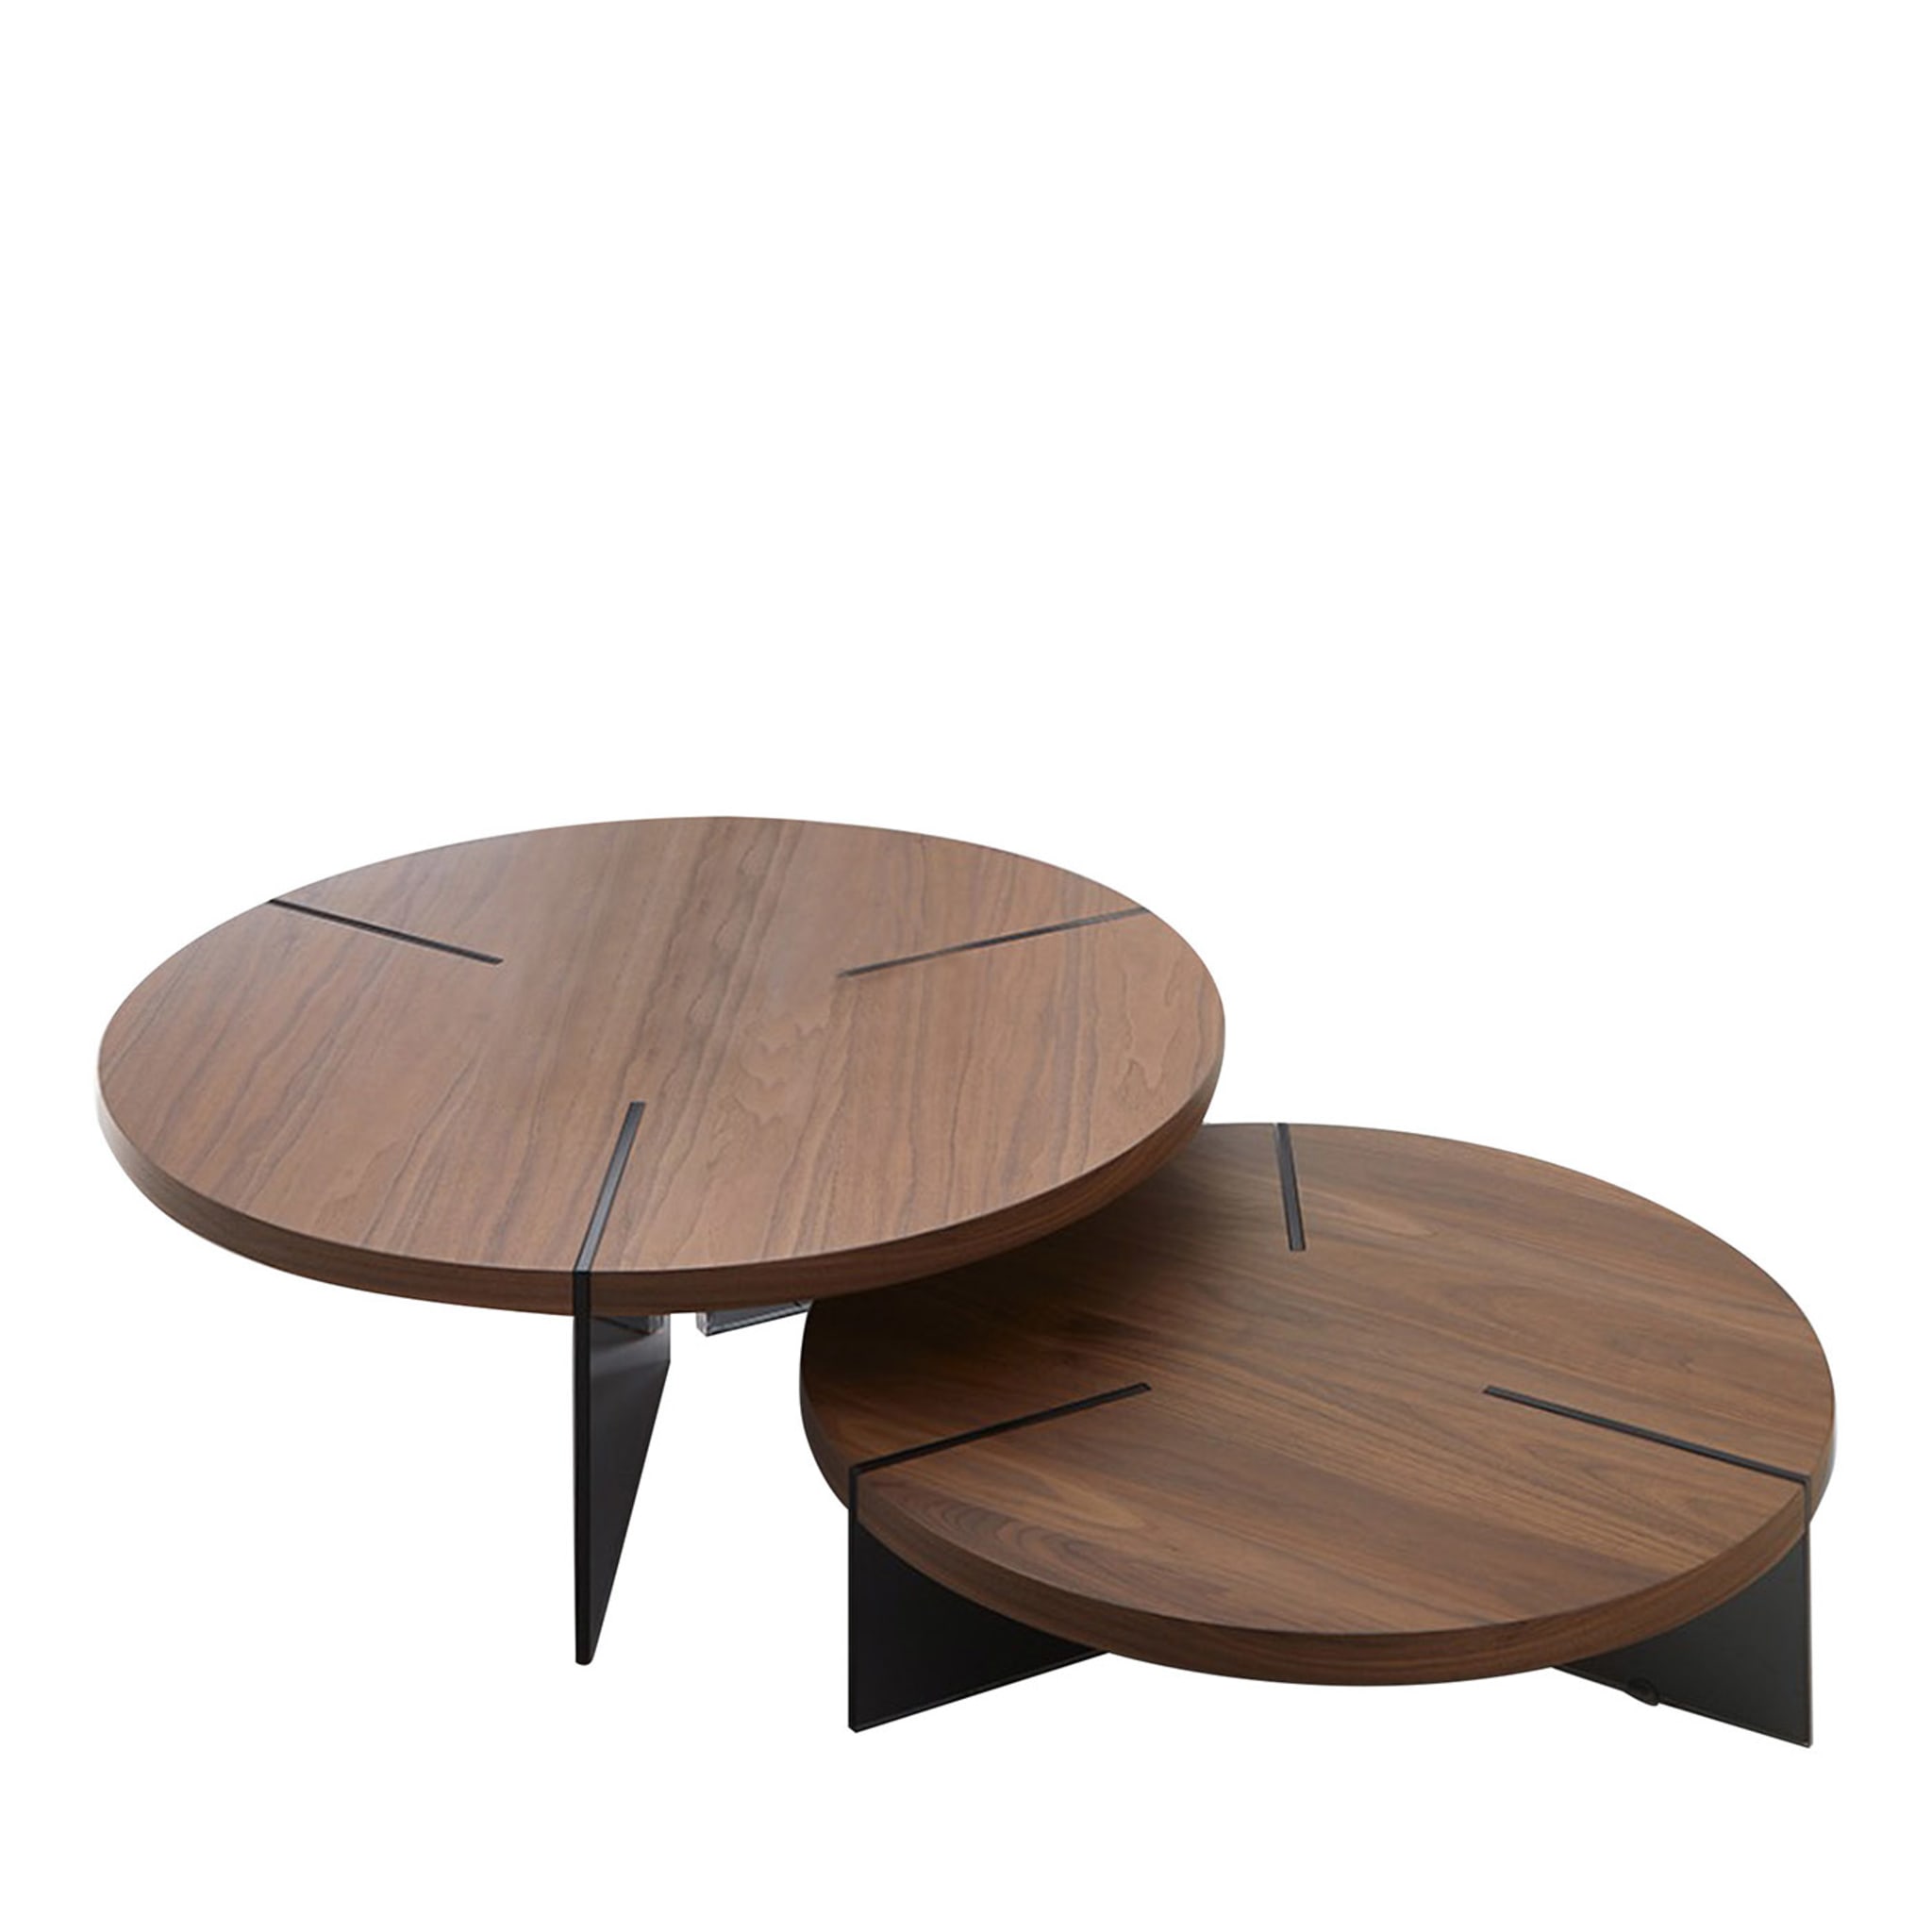 Set of 2 Work Coffee Tables - Main view